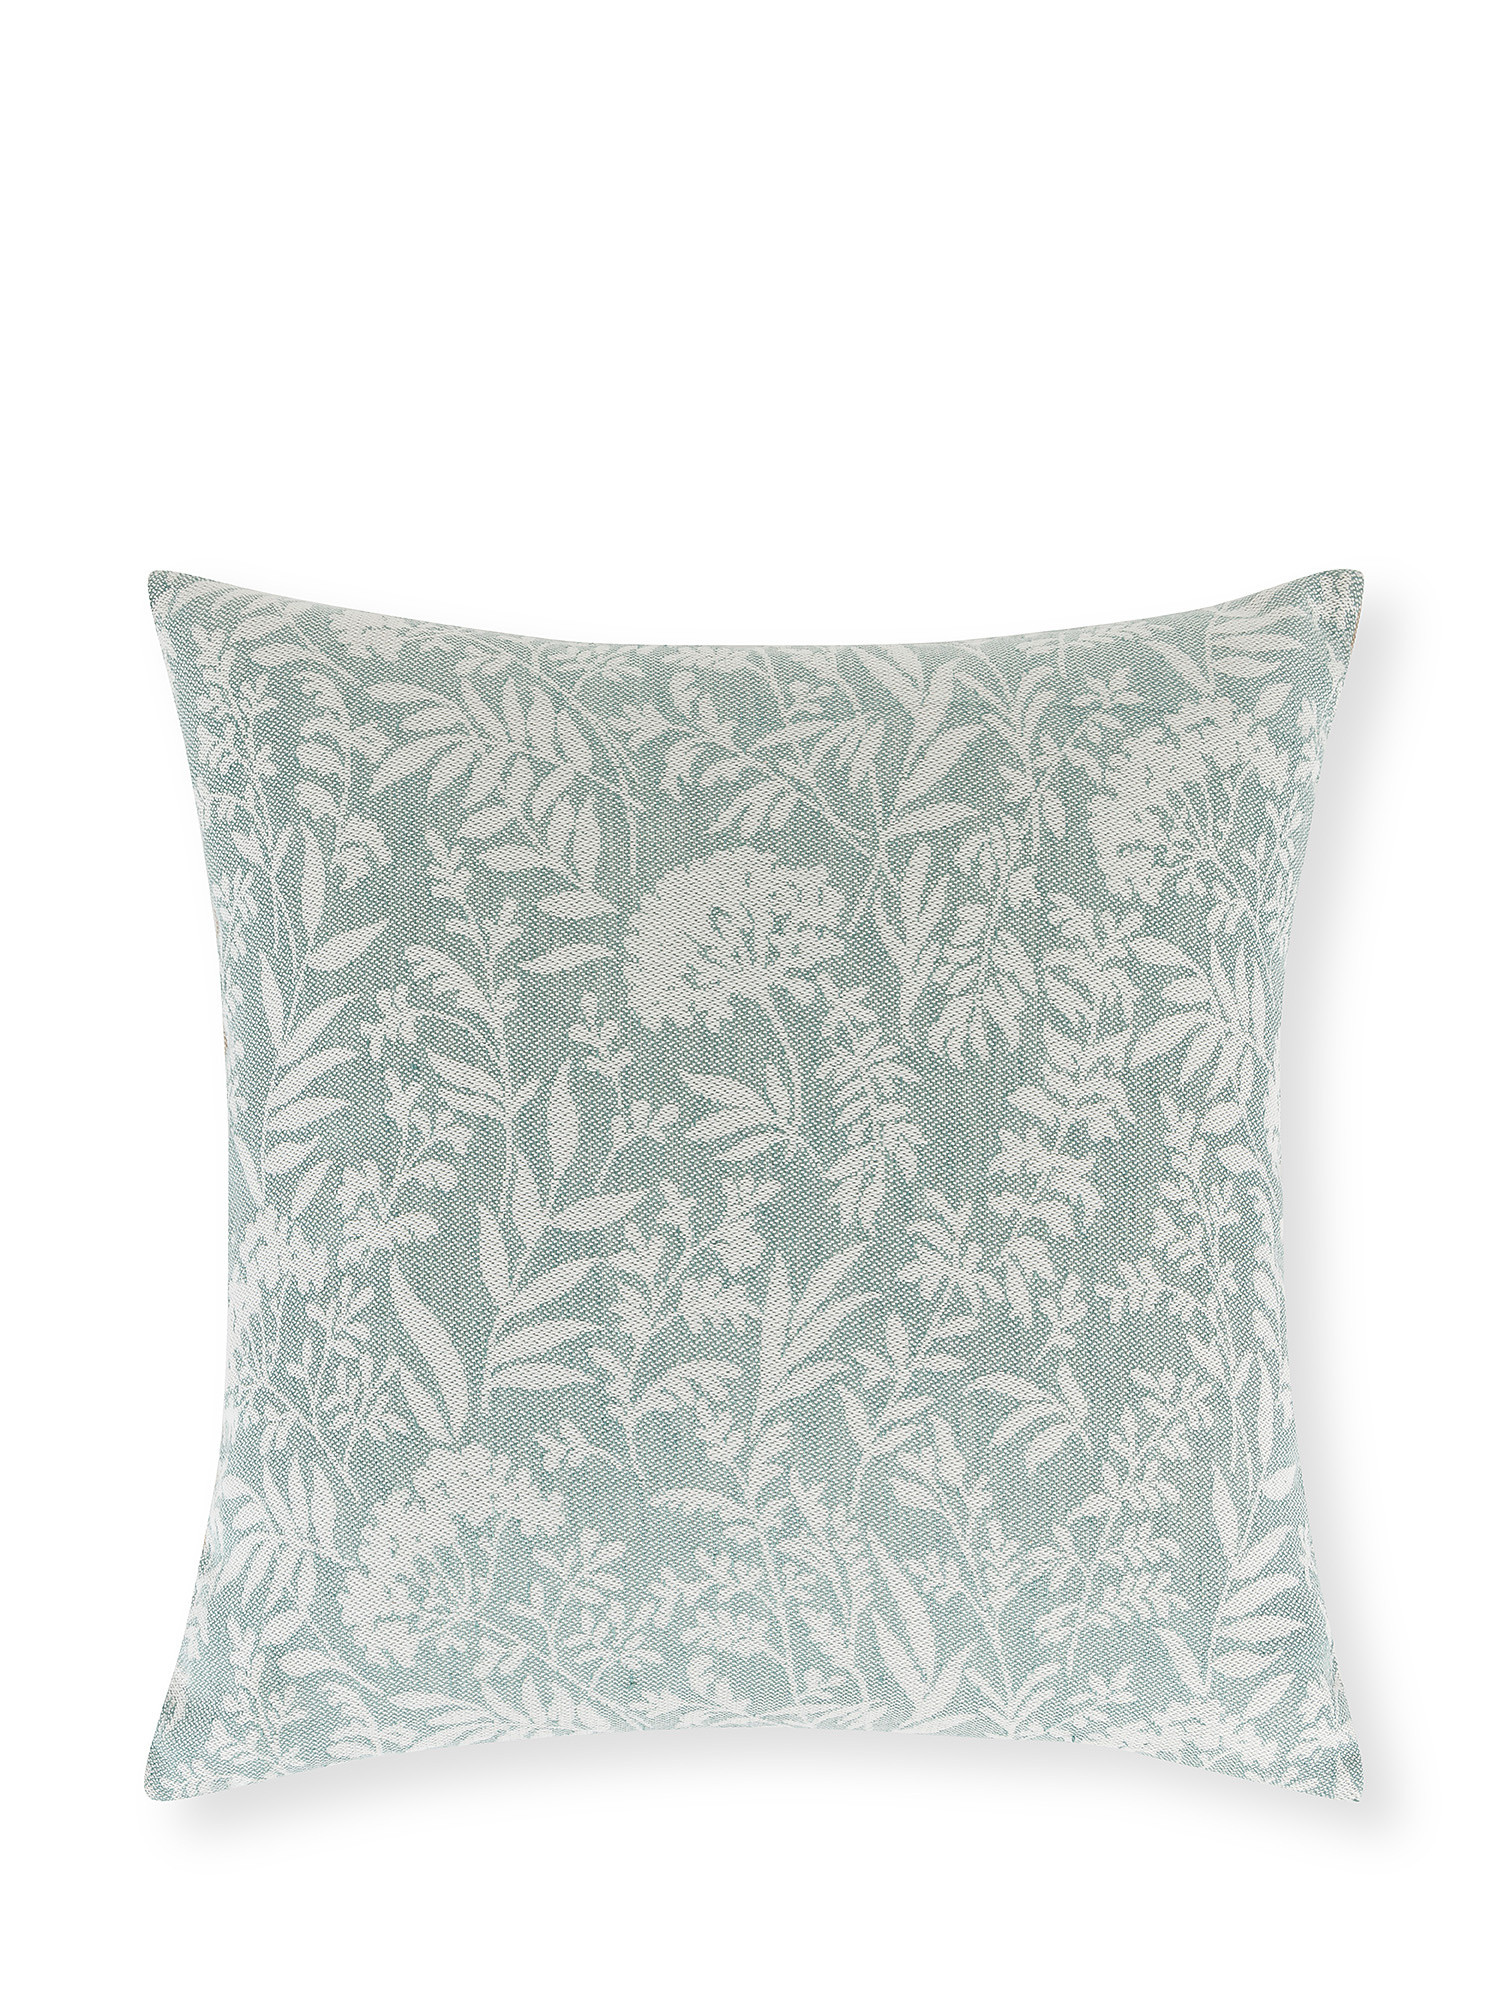 Cotton and linen jacquard cushion with floral motif 45x45cm, Grey, large image number 0